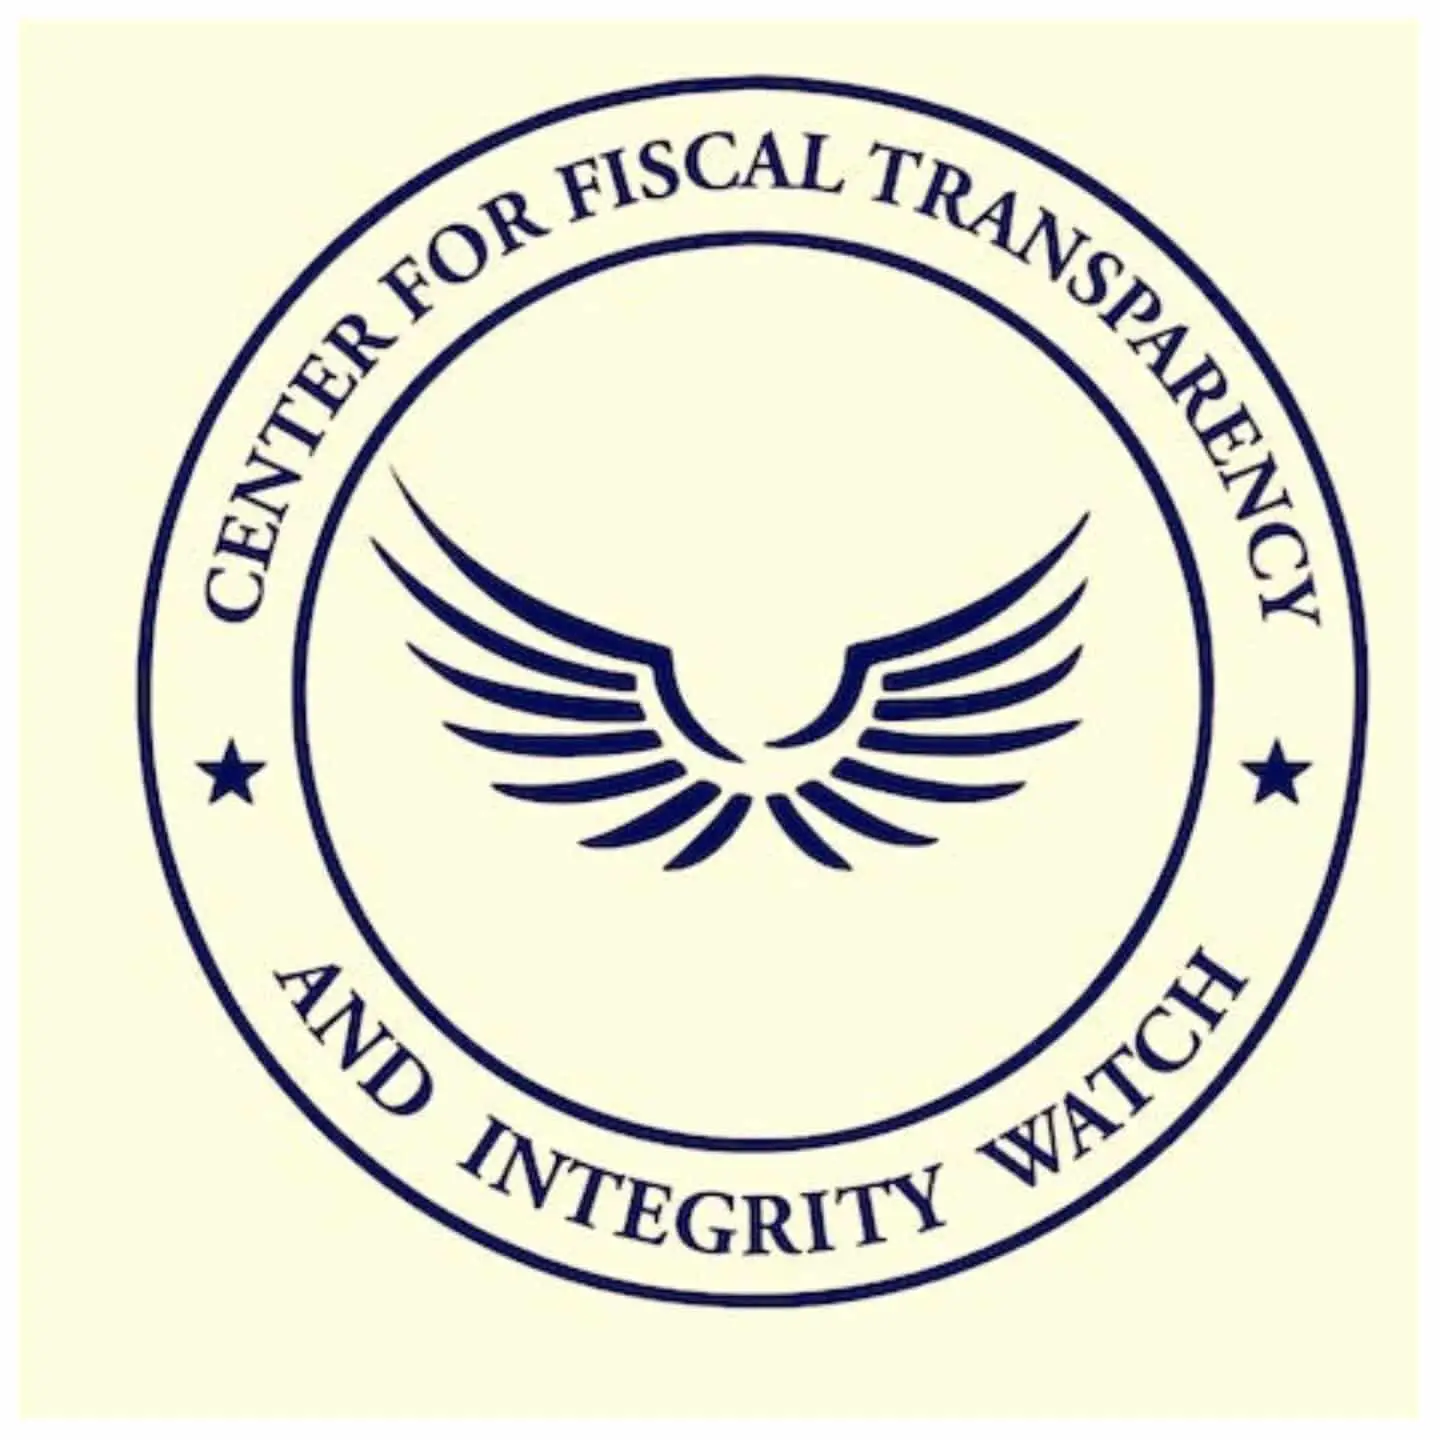 Center-for-Fiscal-Transparency-Integrity-Watch